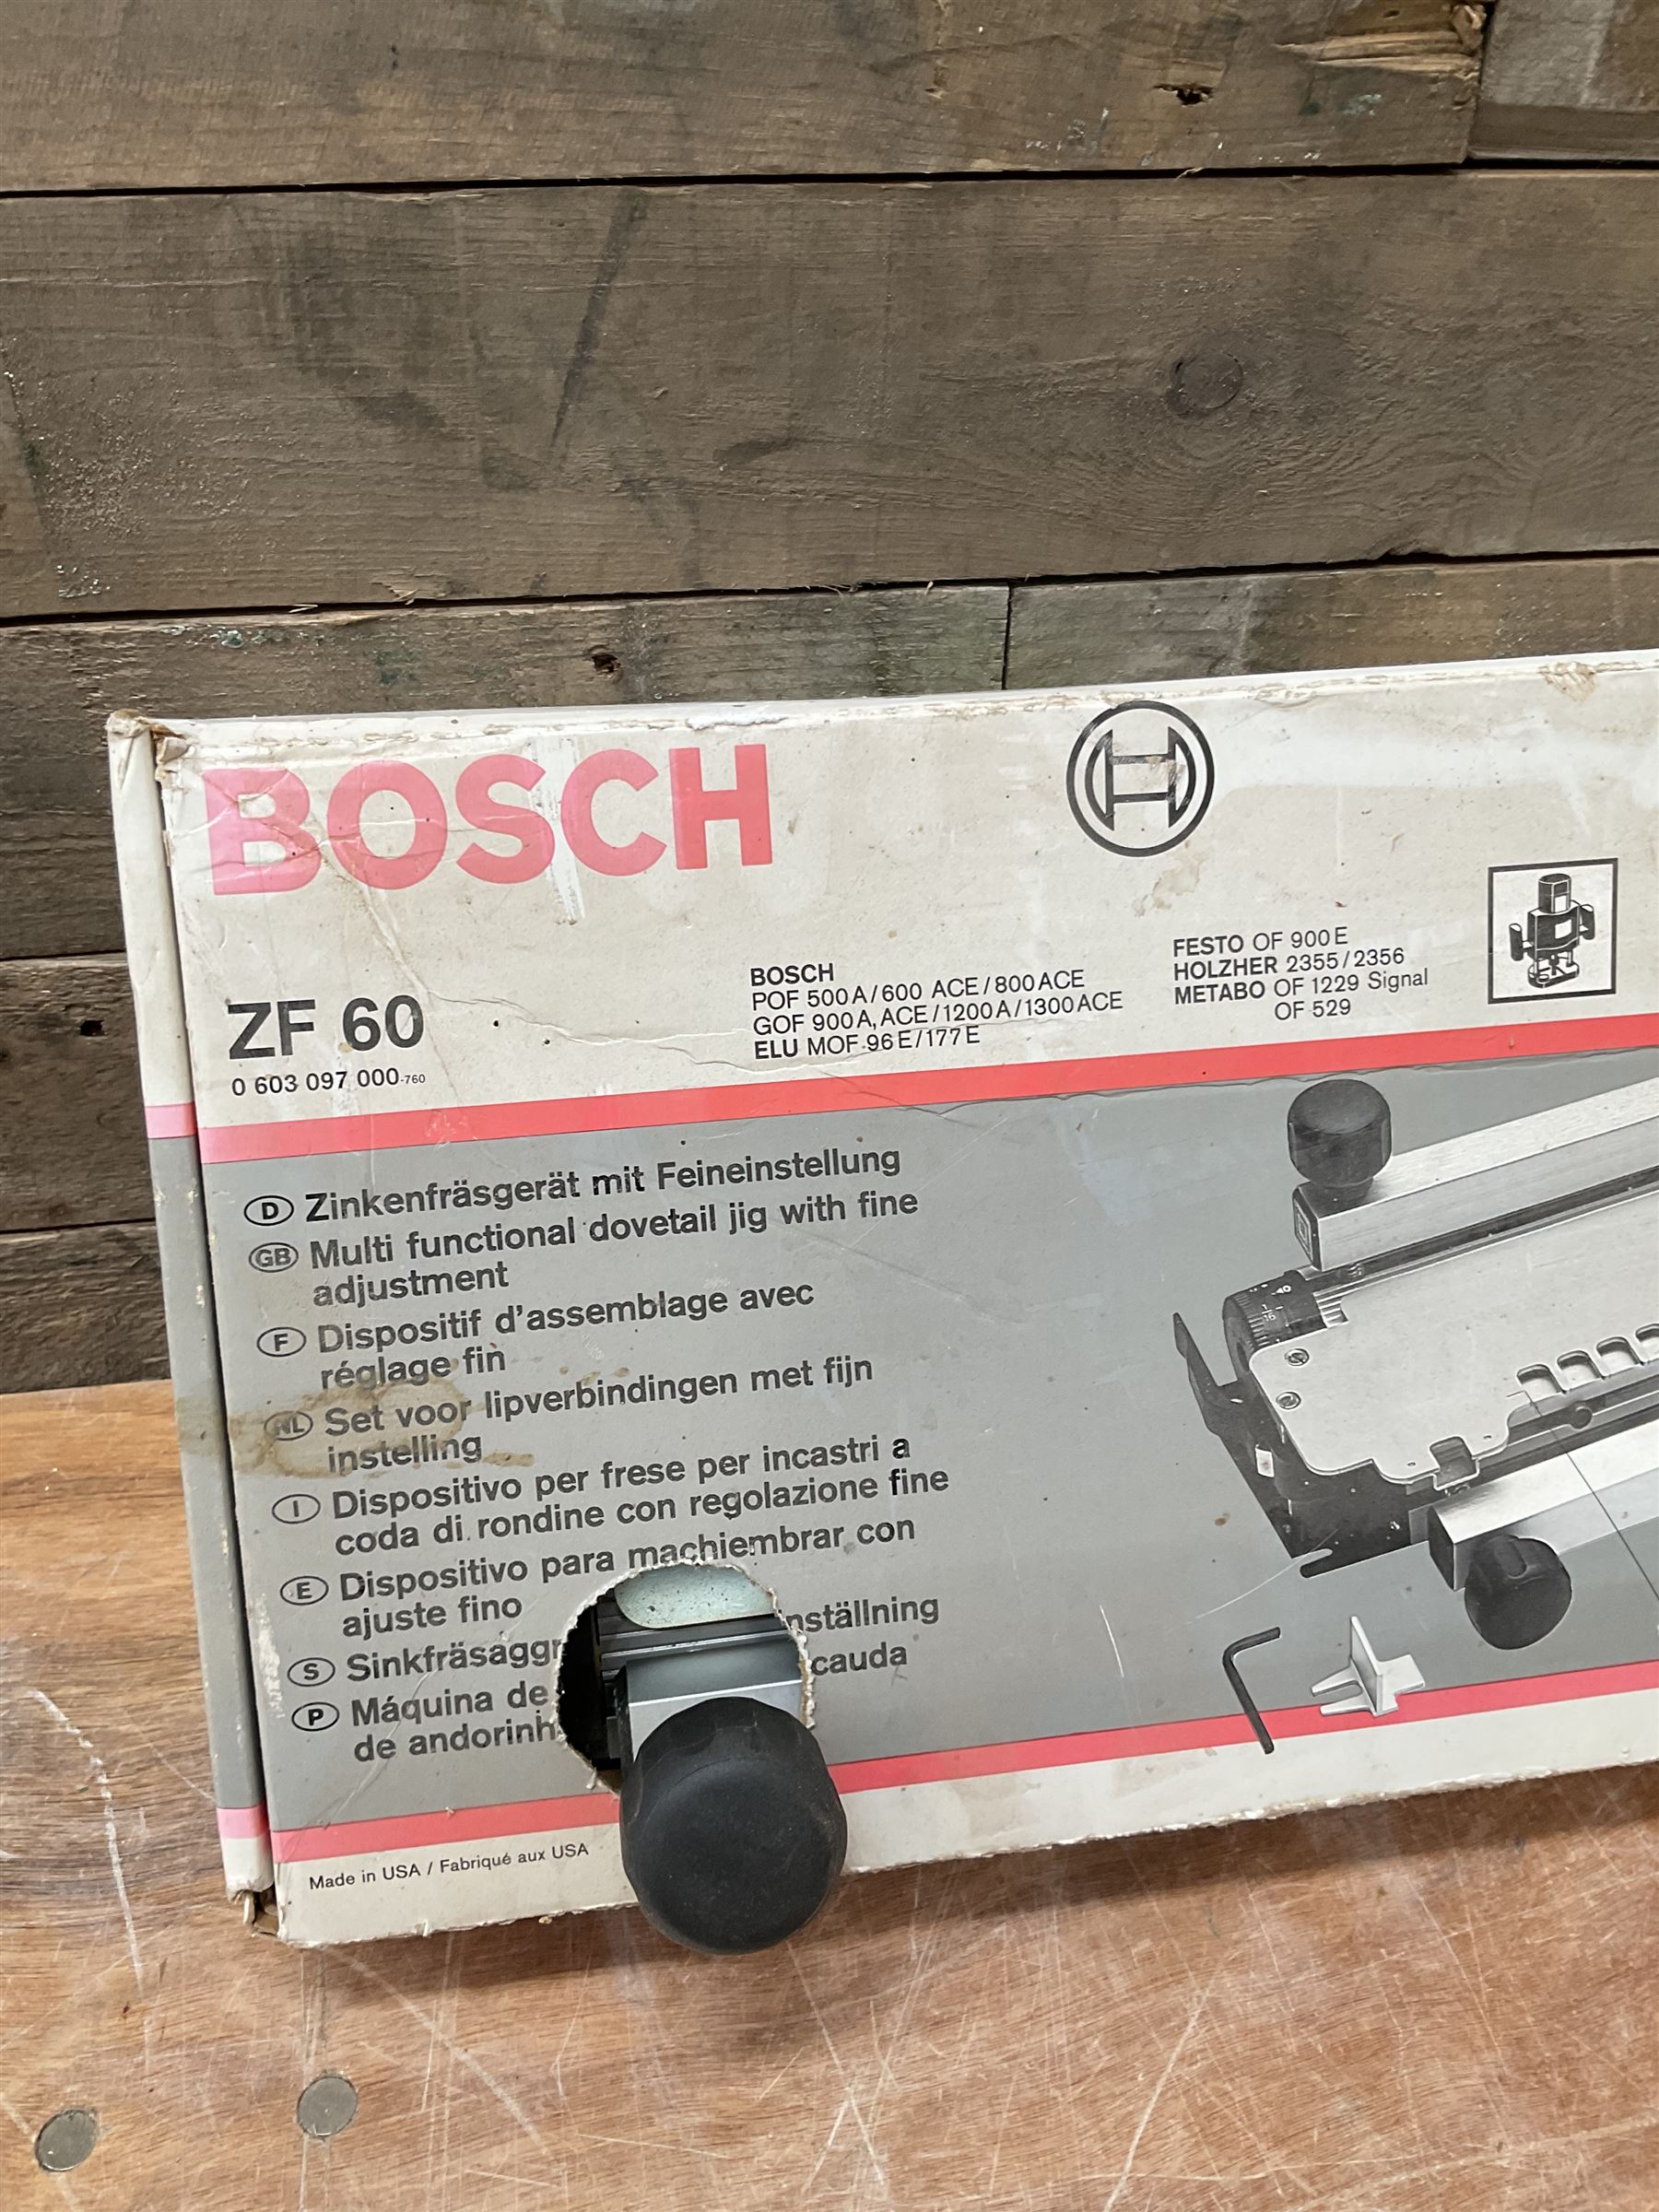 Bosch ZF60 multi functional dovetail jig - Image 2 of 2